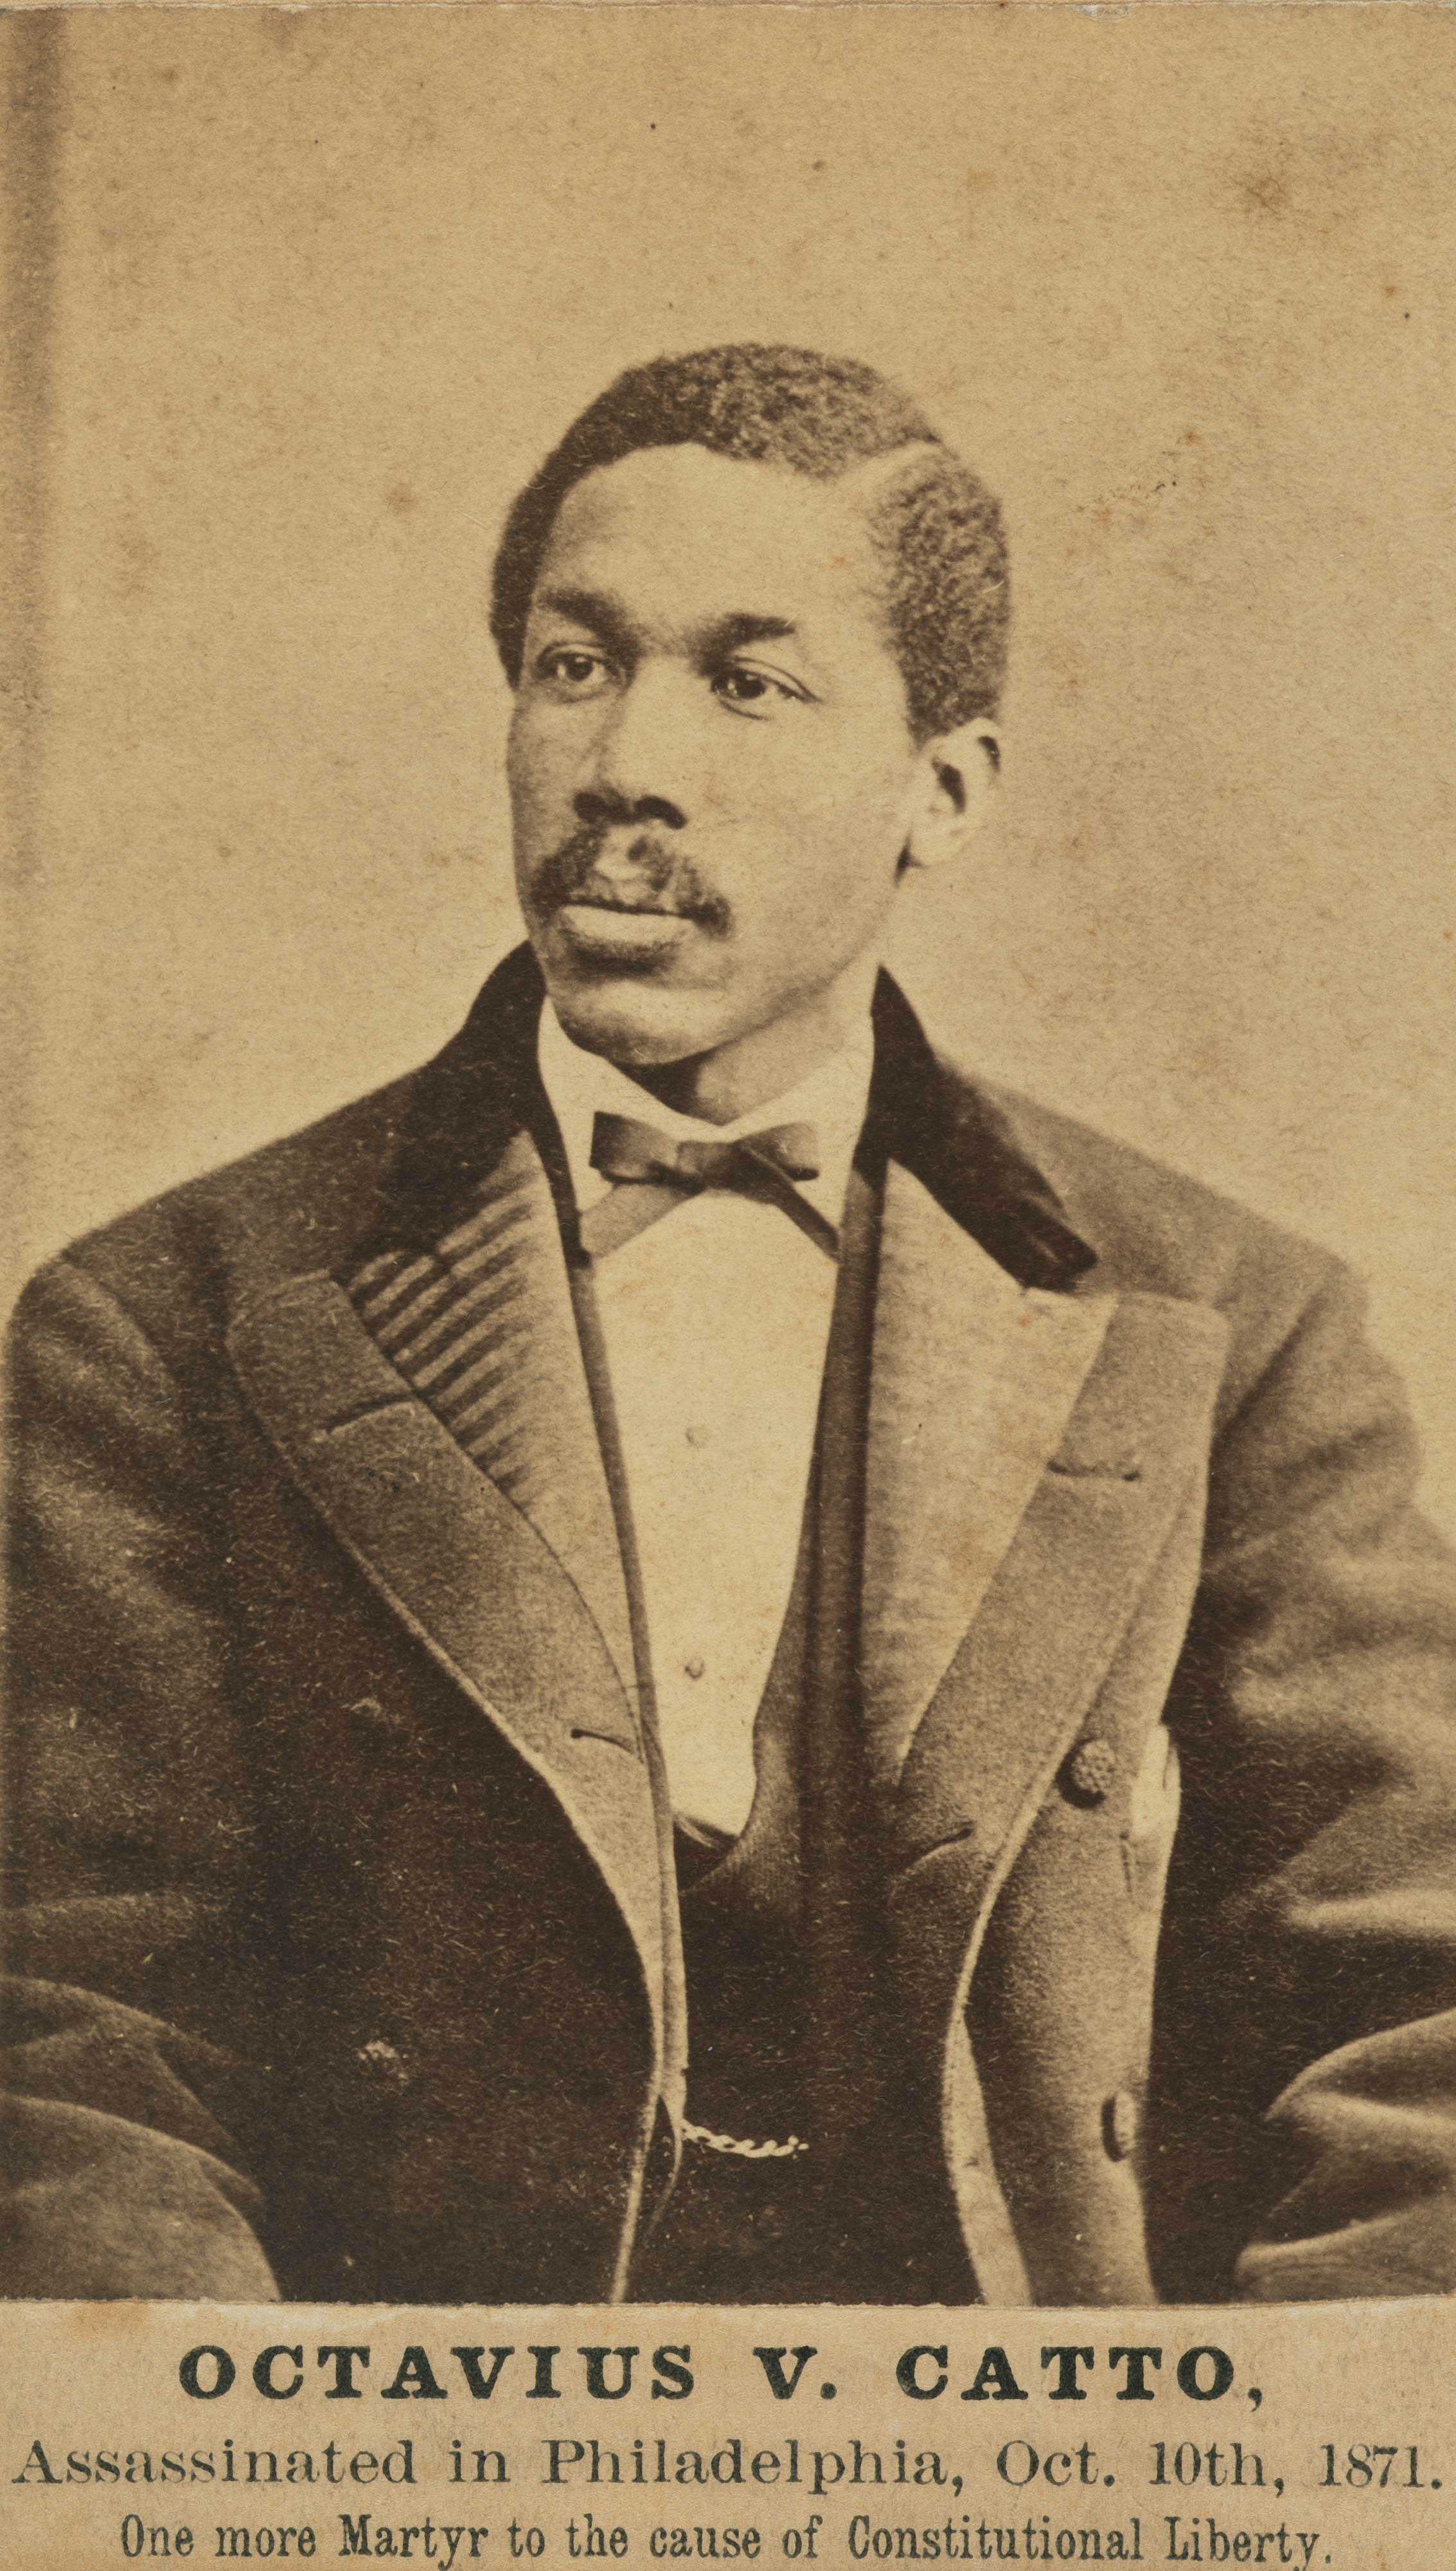 Photographic portrait of African American man dressed in overcoat with bow tie. The text below the image reads "Octavius V. Catto, Assassinated in Philadelphia, Oct. 10th, 1871.  One more Martyr to the cause of Constitutional Liberty.